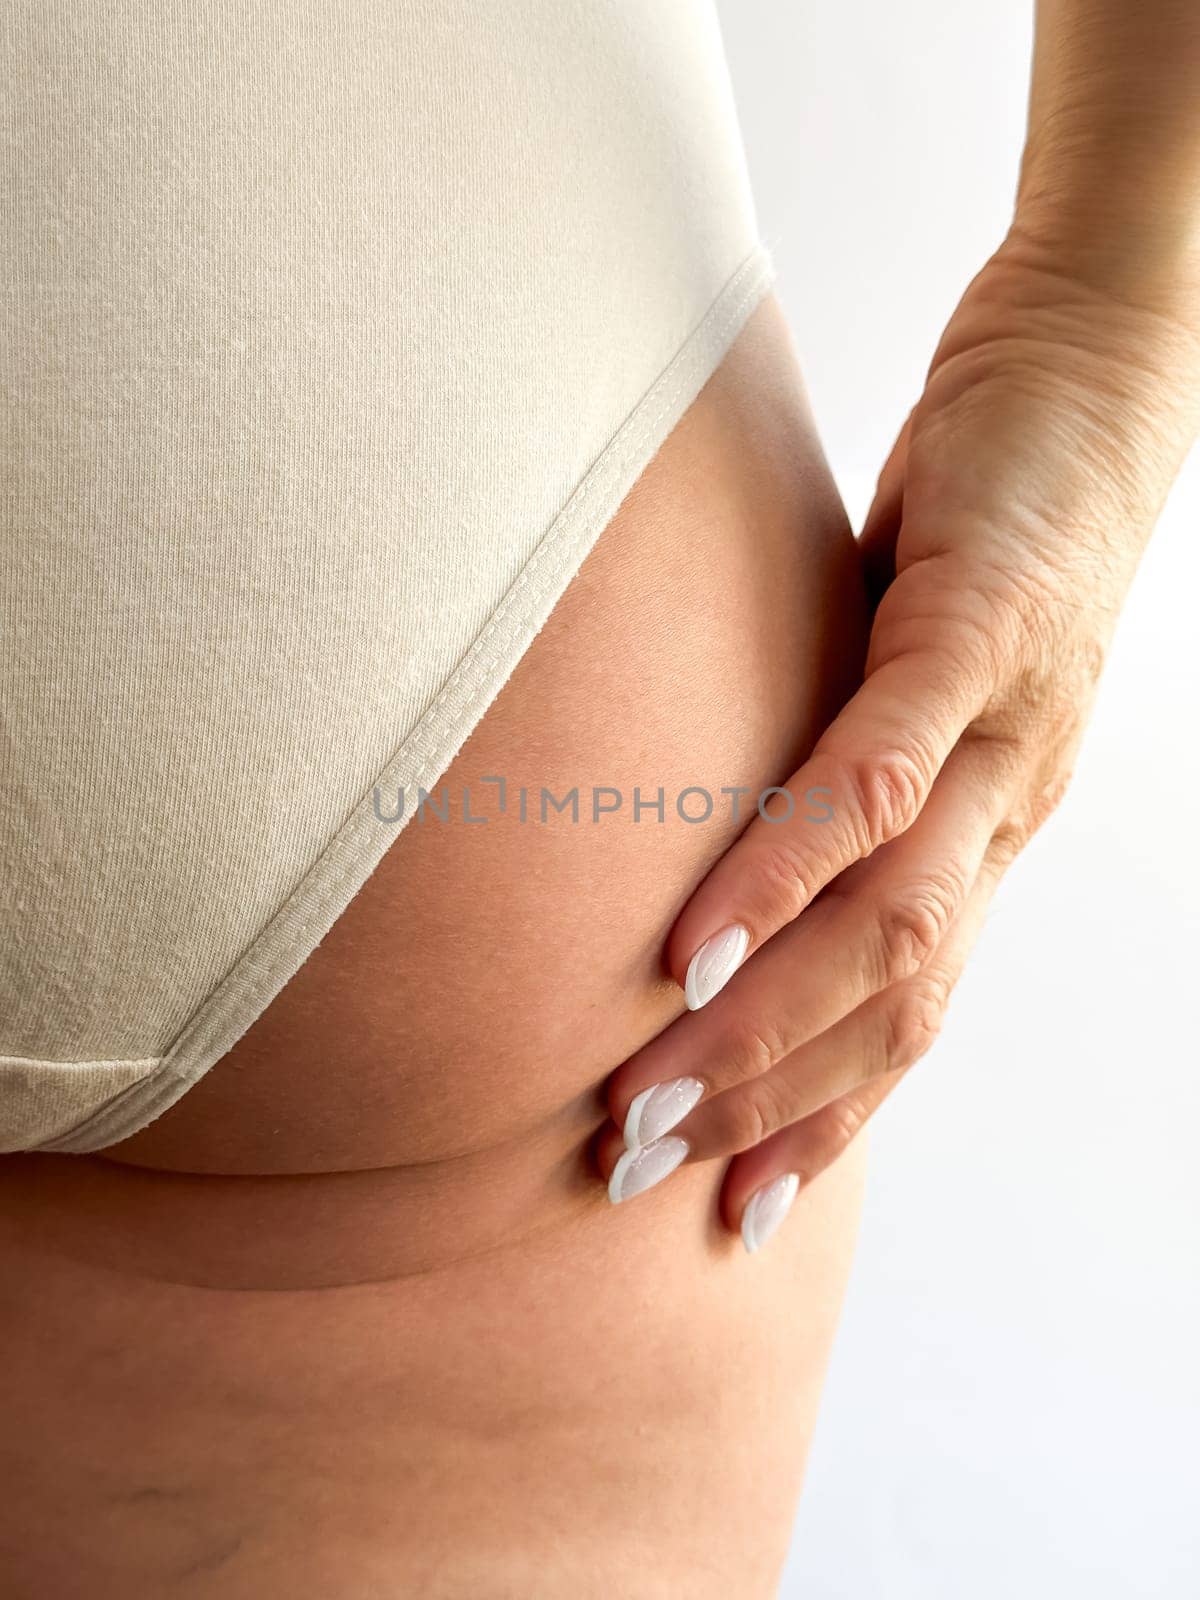 Close up of womans hand with white nails resting on hip, wearing beige underwear. Focuses on skincare, body care, and personal hygiene, highlighting healthy skin and well groomed nails. High quality